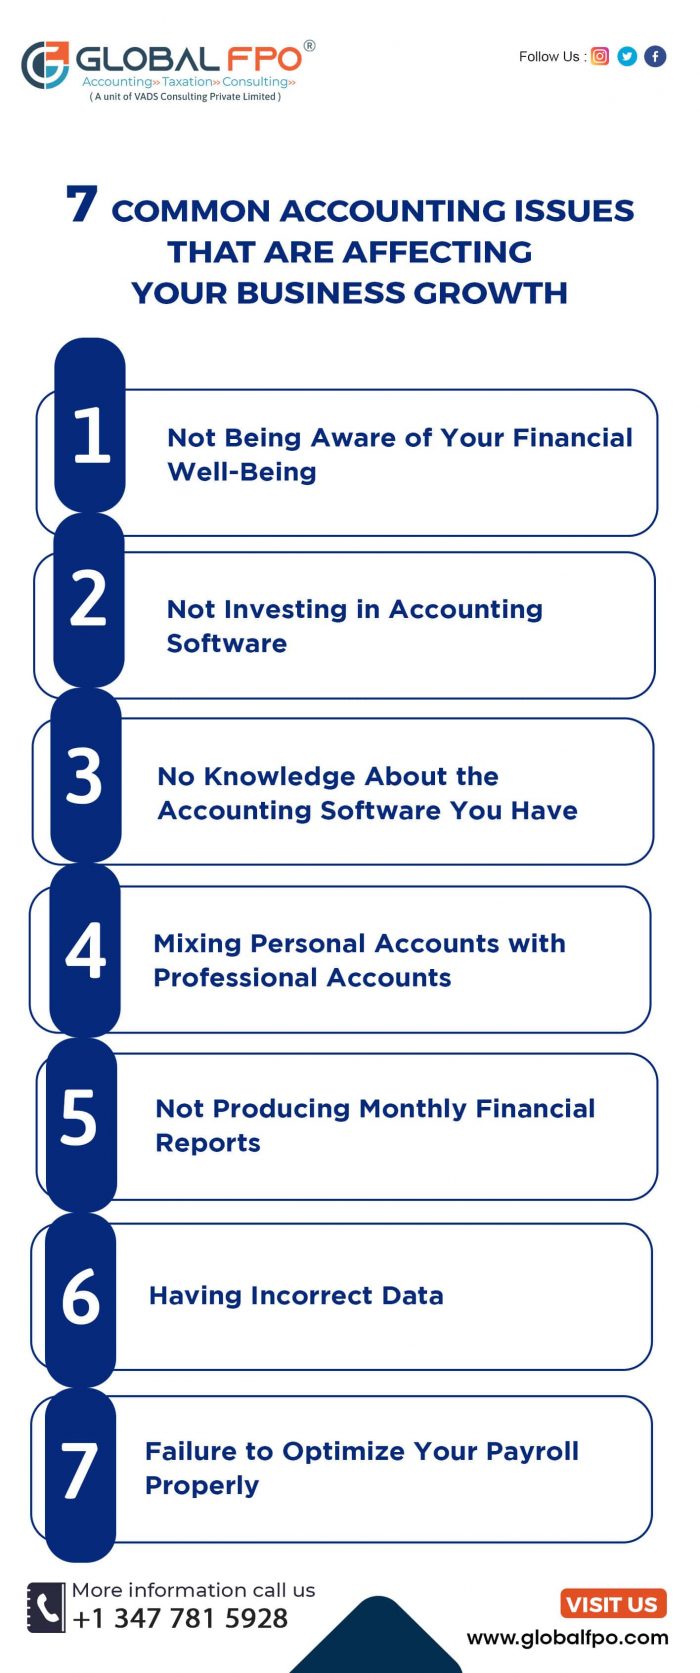 7 Common Accounting issues that are Affective Your Business Growth